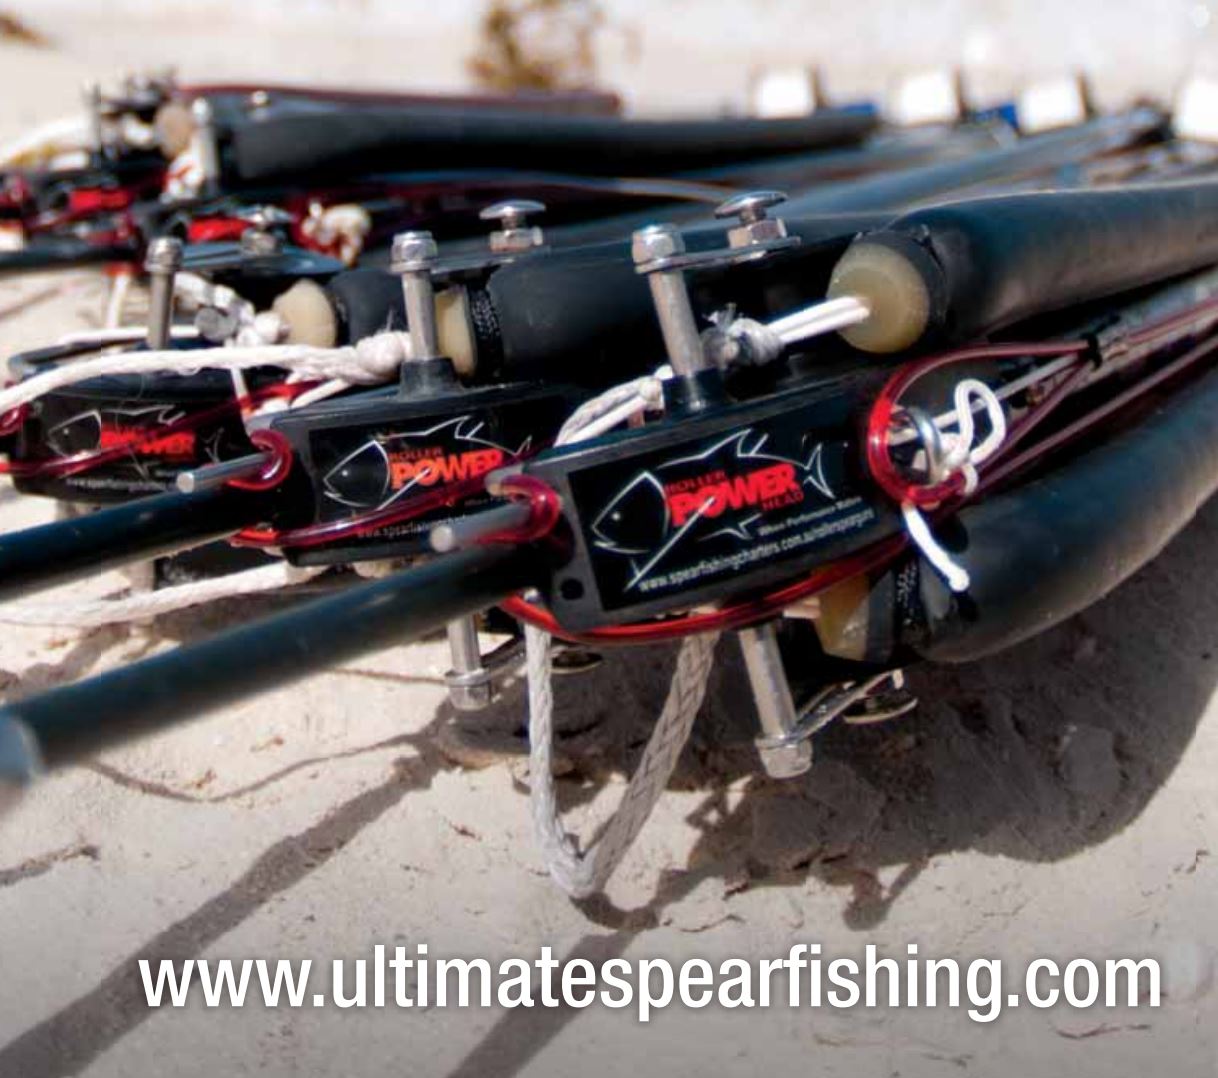 Simply Effective Guns – Ultimate Spearfishing – Home